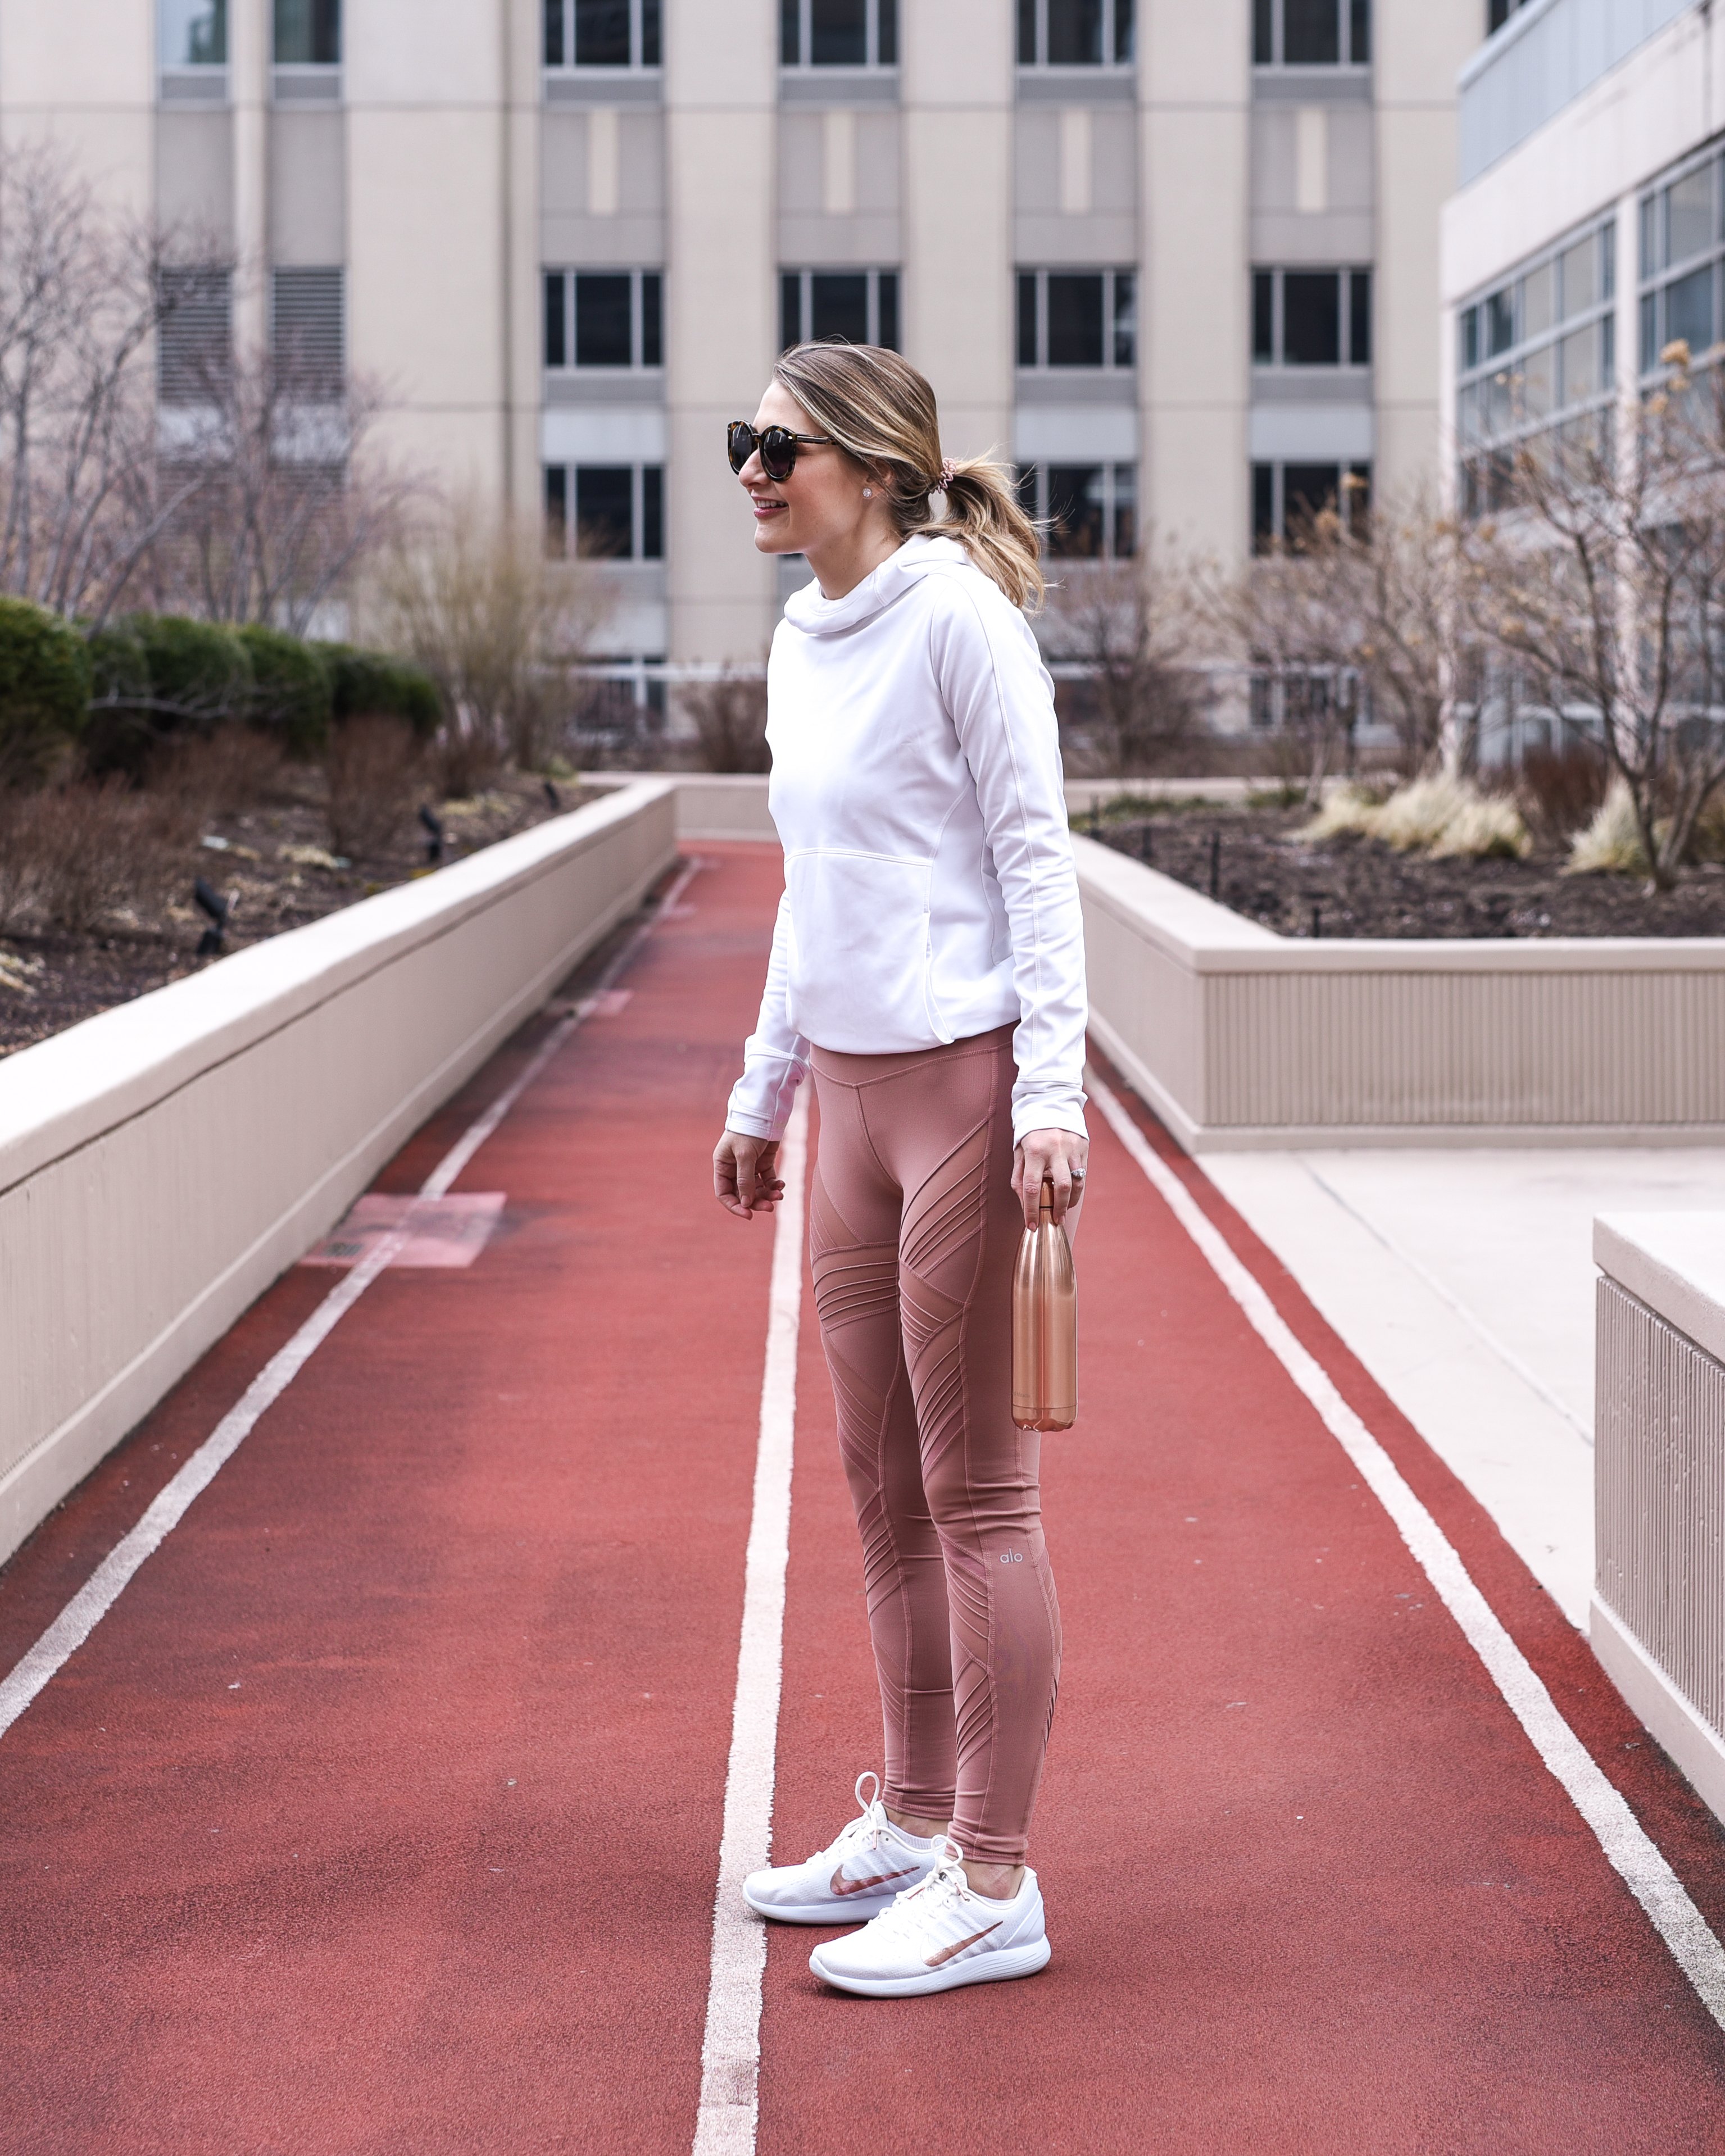 how to stay fit in winter - winter workout routine by popular Chicago lifestyle blogger Visions of Vogue